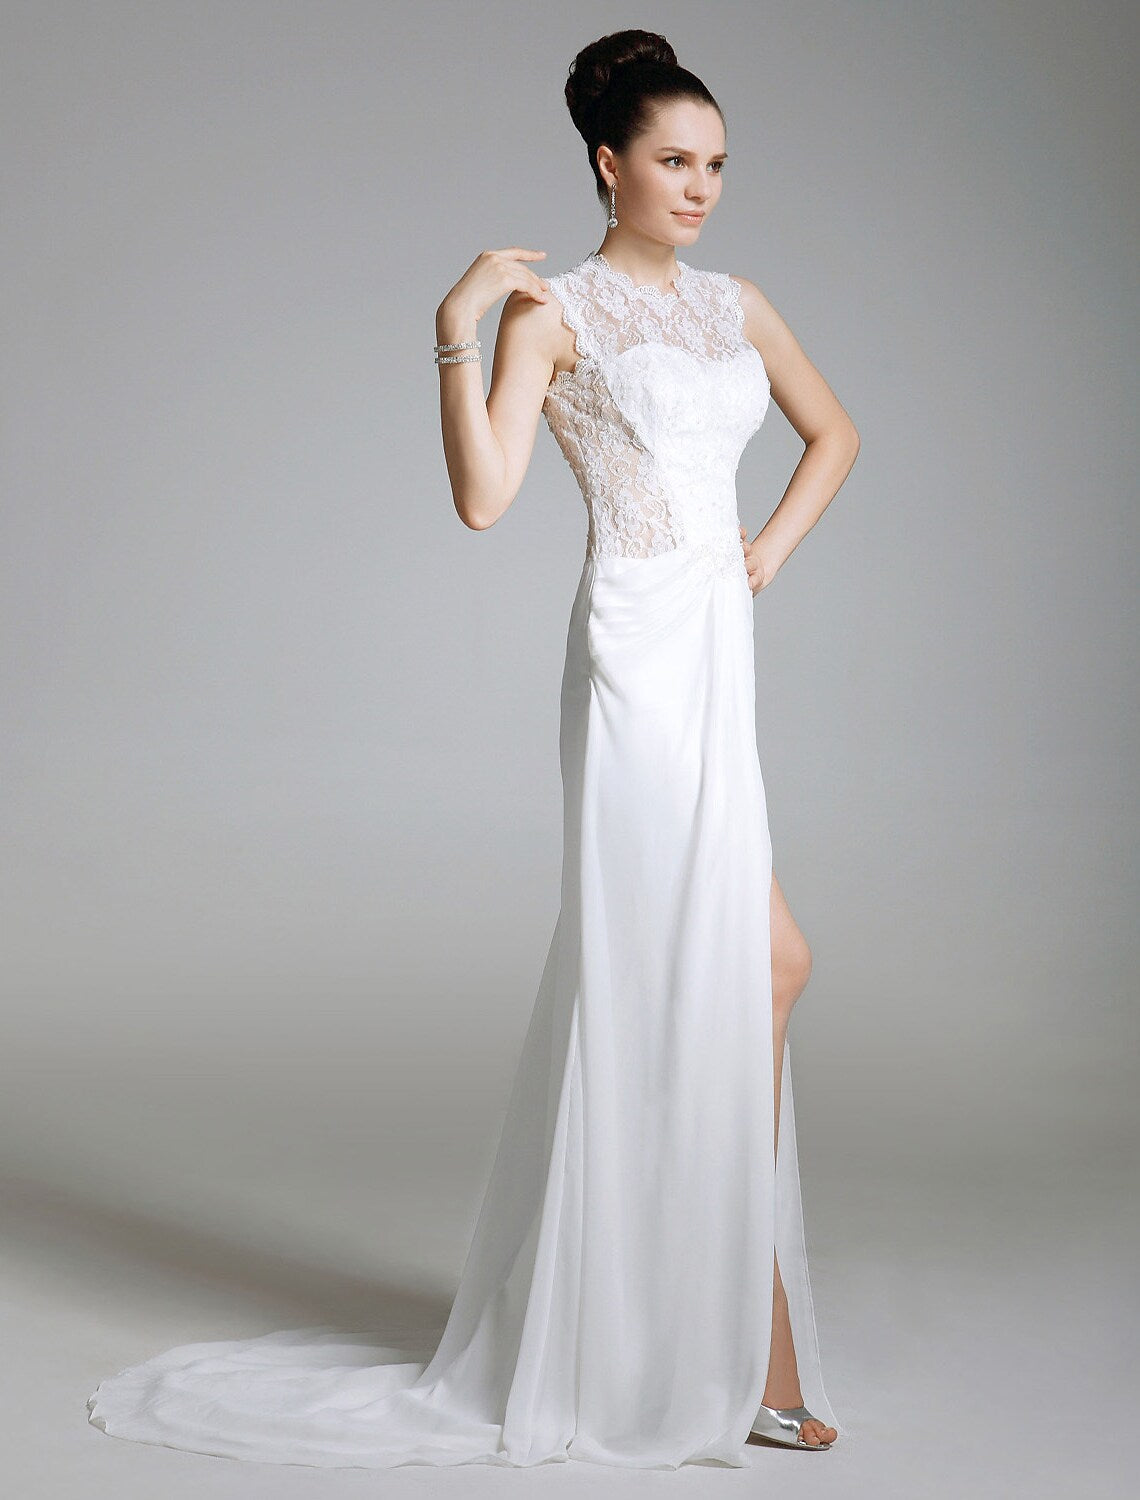 Celebrity Style Dress Formal Evening Sleeveless Chiffon with Lace Split Front